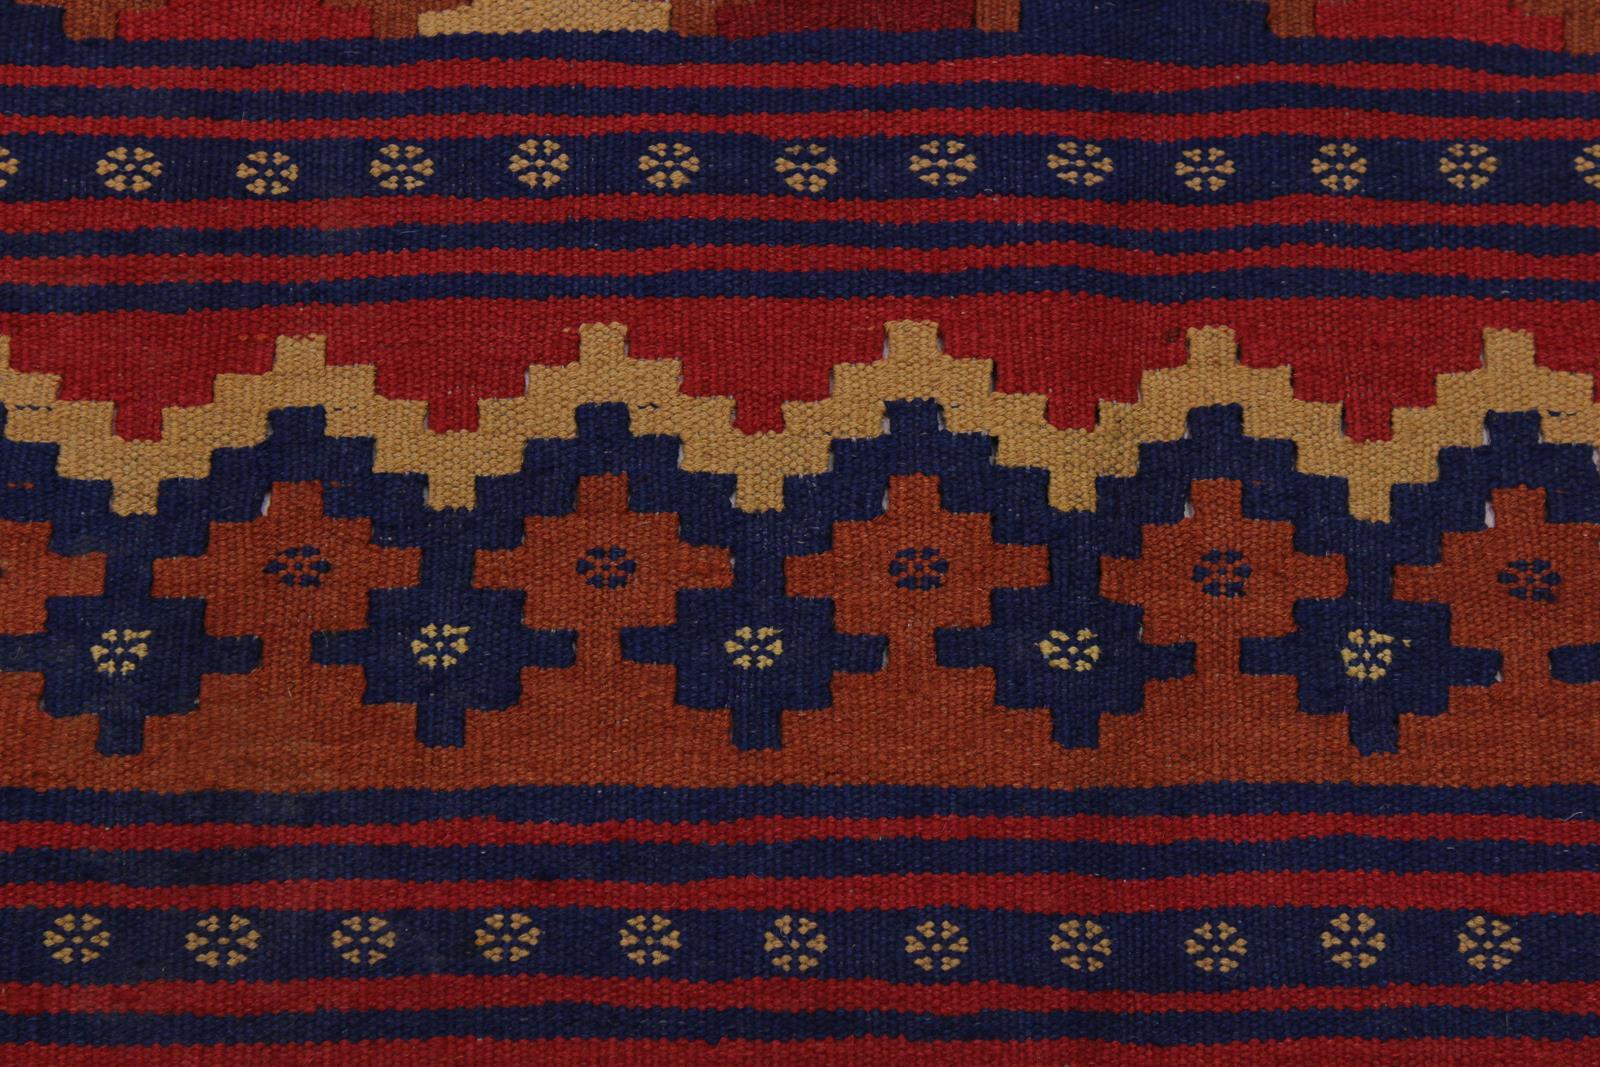 A10656, 410"x 6 7",Geometric                     ,5x7,Red,BLUE,Hand-woven                    ,Afghanistan,100% Wool  ,Rectangle  ,652671197734